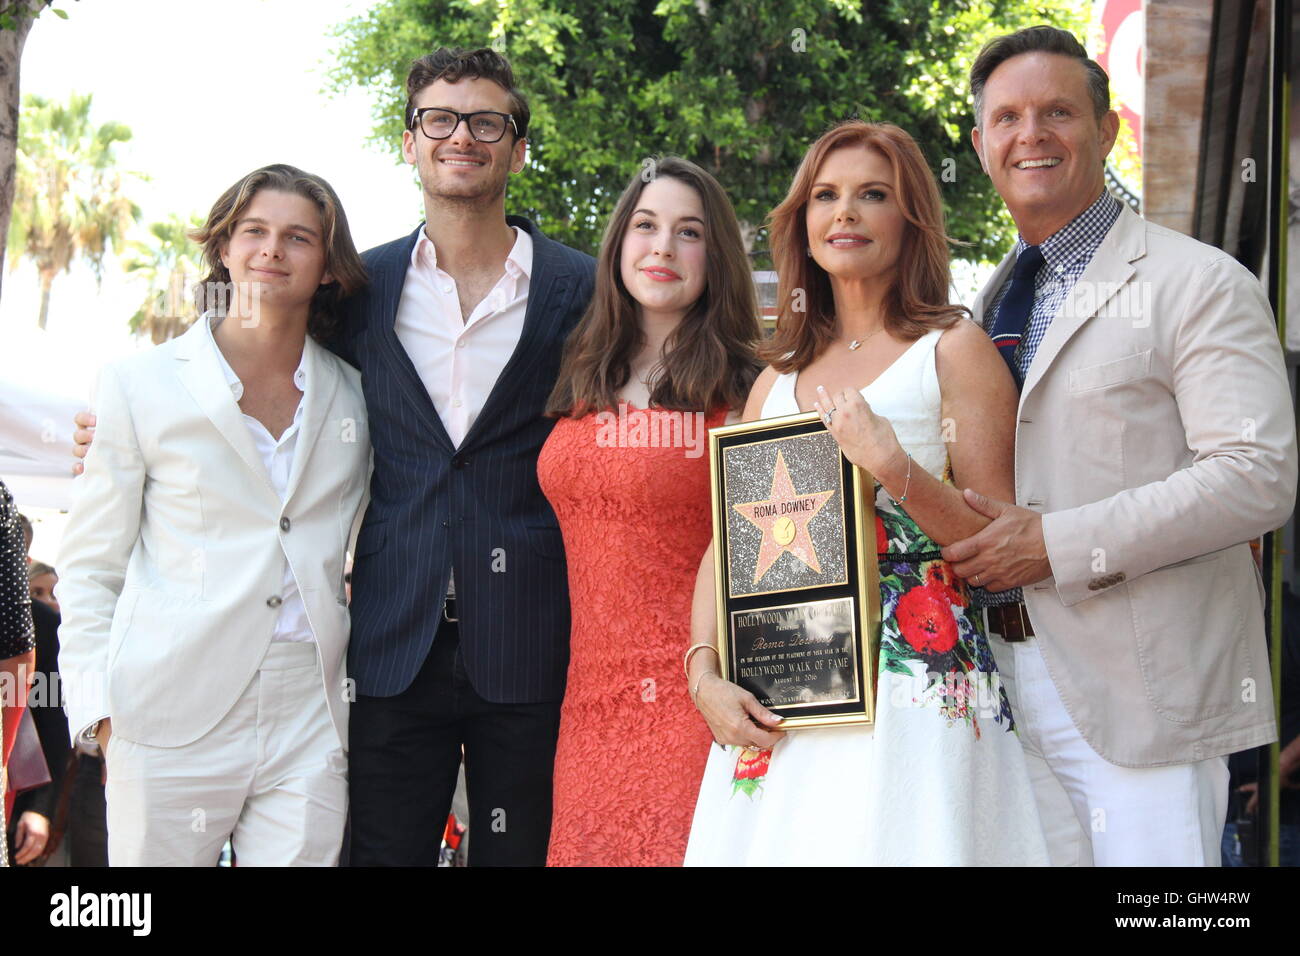 Hollywood, California, USA. 11th Aug, 2016. I15842CHW.Actress And Producer Roma Downey Honored With Star On The Hollywood Walk Of Fame .6664 Hollywood Boulevard, Hollywood, CA.08/11/2016.ROMA DOWNEY, MARK BURNETT AND FAMILY ATTEND ROMA DOWNEY'S HOLLYWOOD WALK OF FAME STAR CEREMONY . © Clinton H. Wallace/Photomundo International/ Photos Inc Credit:  Clinton Wallace/Globe Photos/ZUMA Wire/Alamy Live News Stock Photo